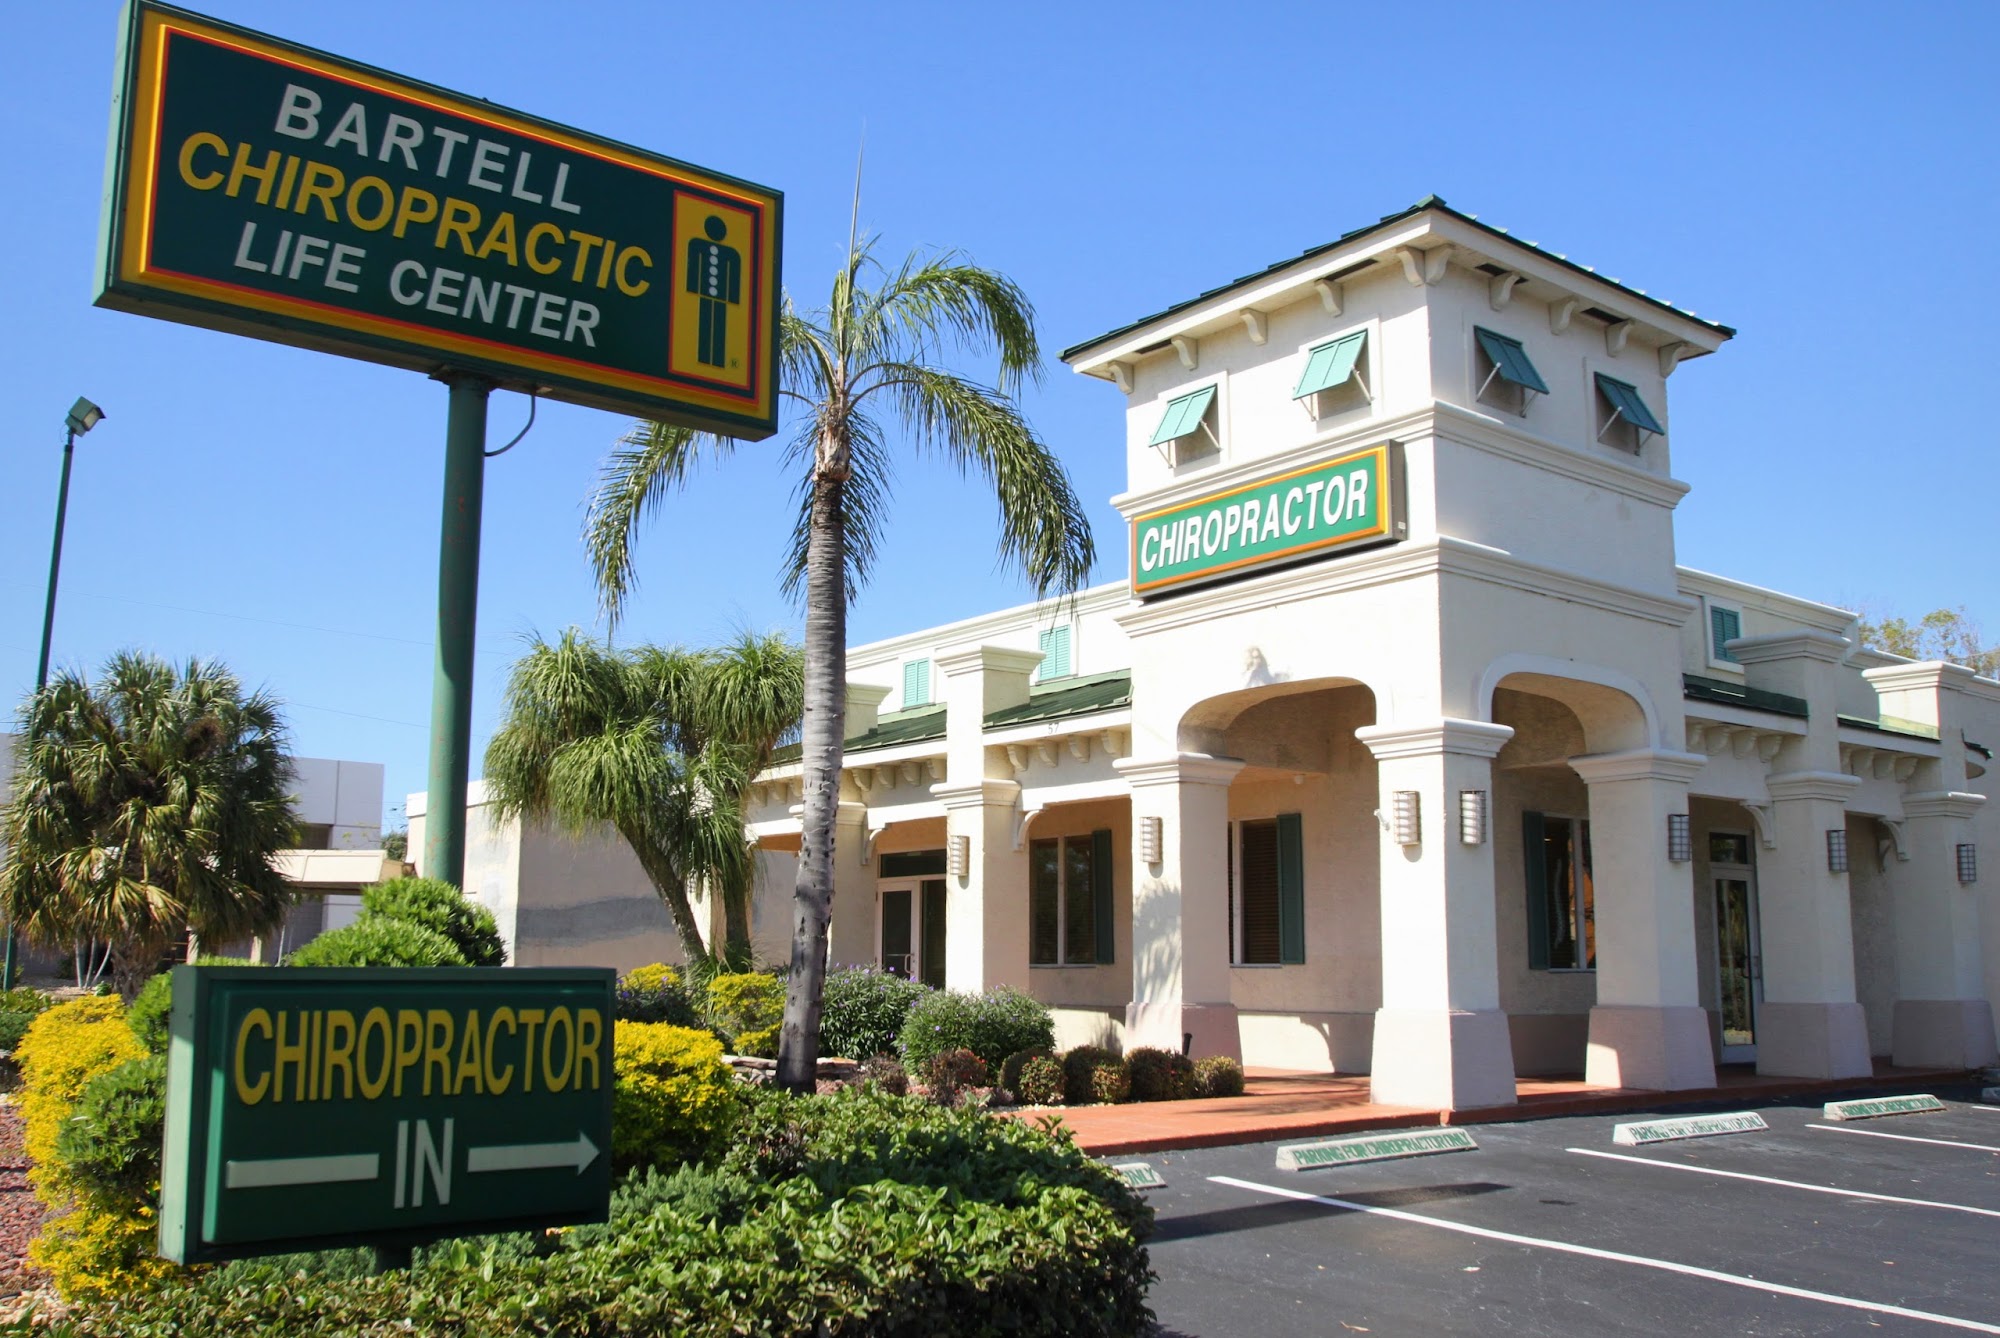 Bartell Chiropractic Life Center